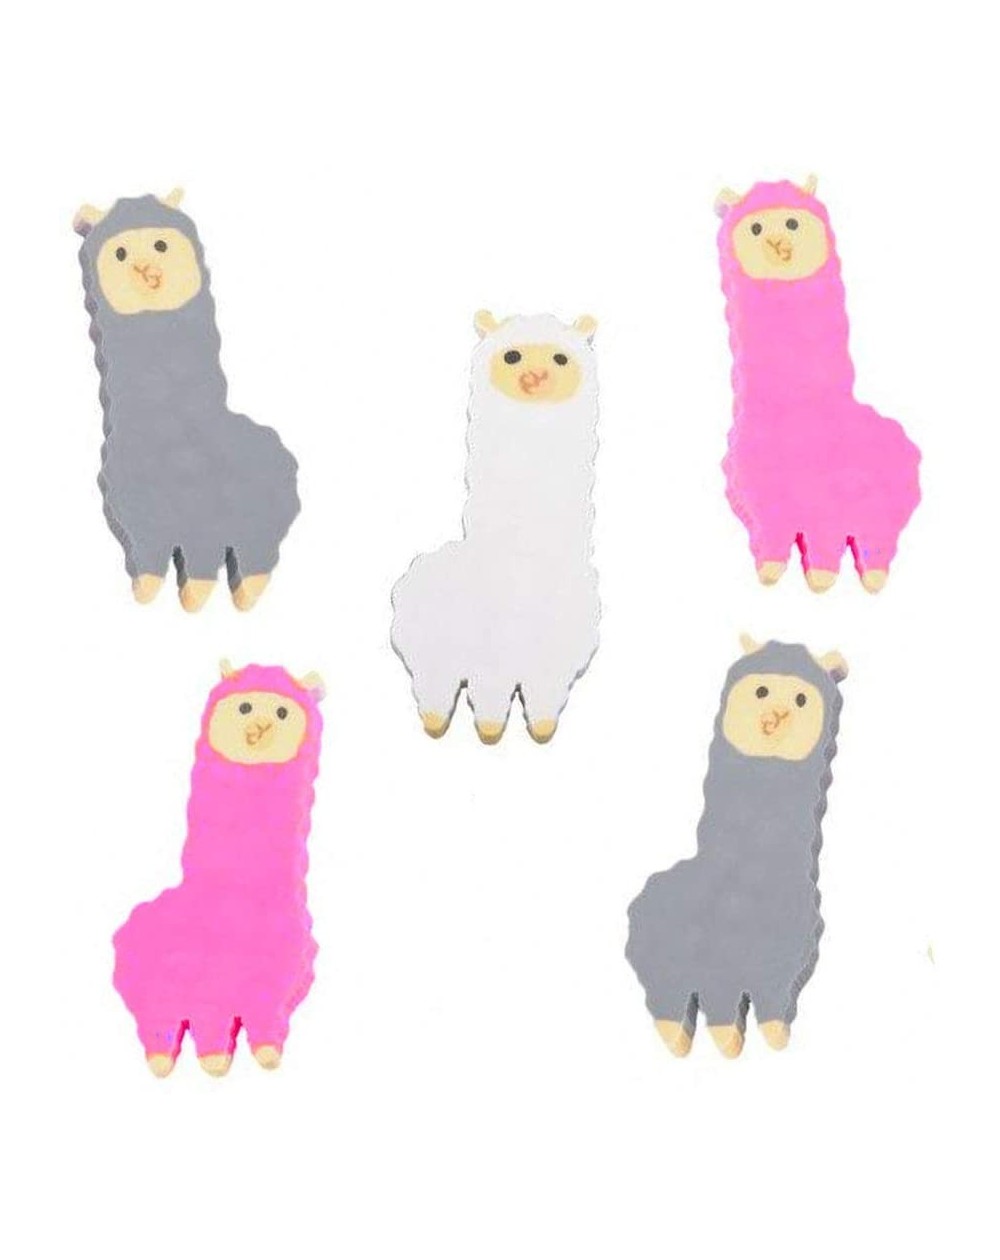 Party Favors Alpaca Animal Rubber Erasers - Classroom Party Favor Pack - Assorted Colors - For Birthdays or School Treat Bags...